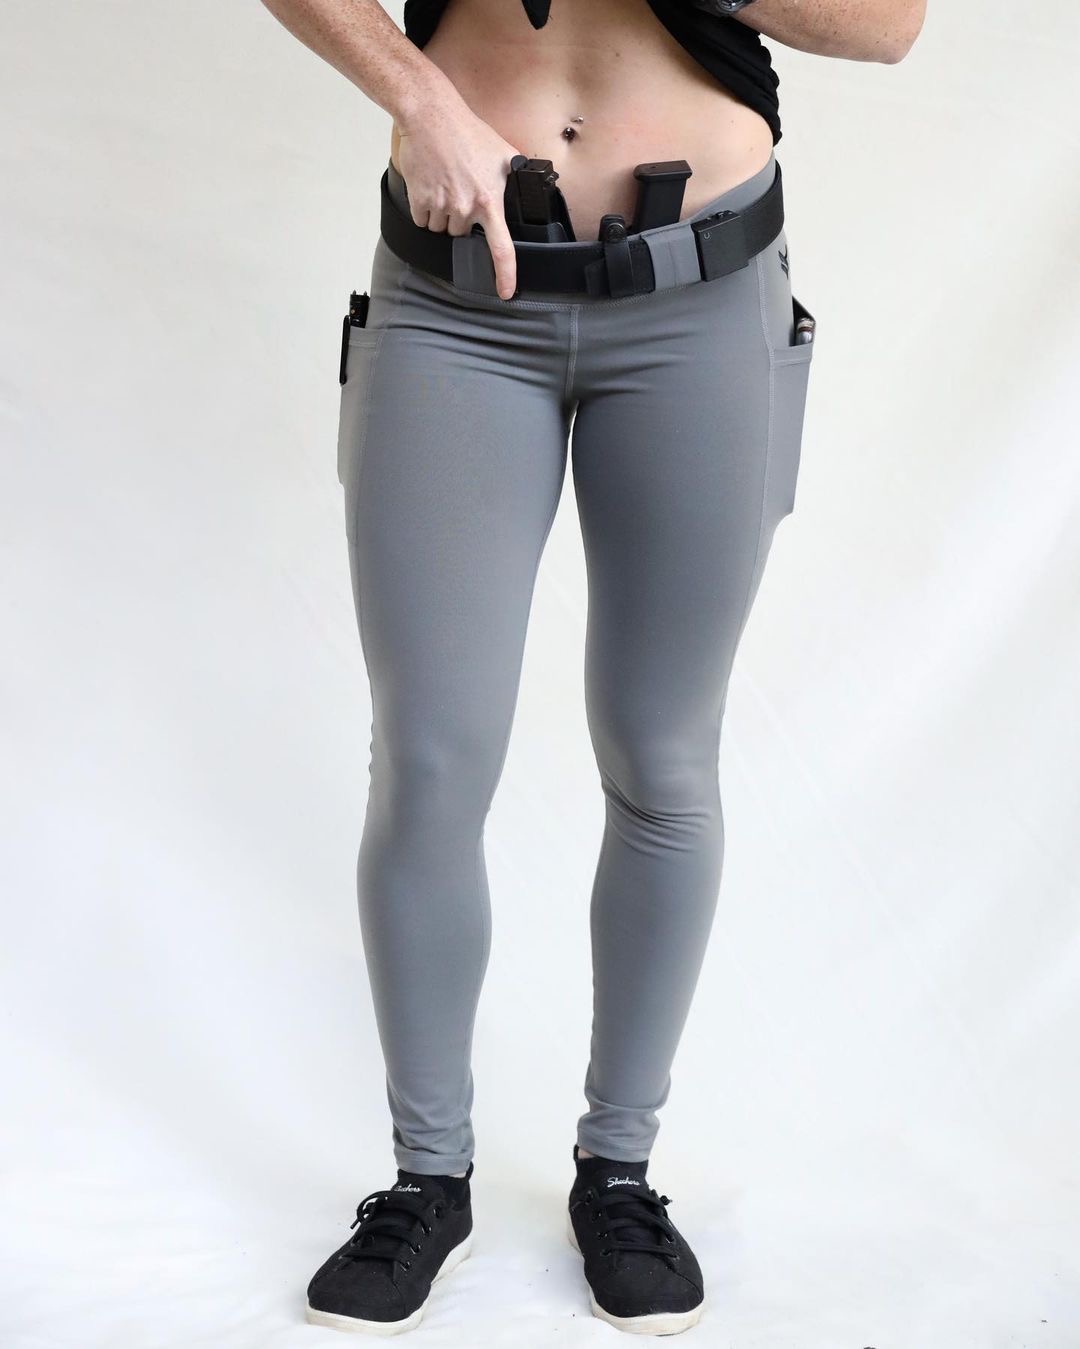 Tactical Leggings Concealed Carry…still